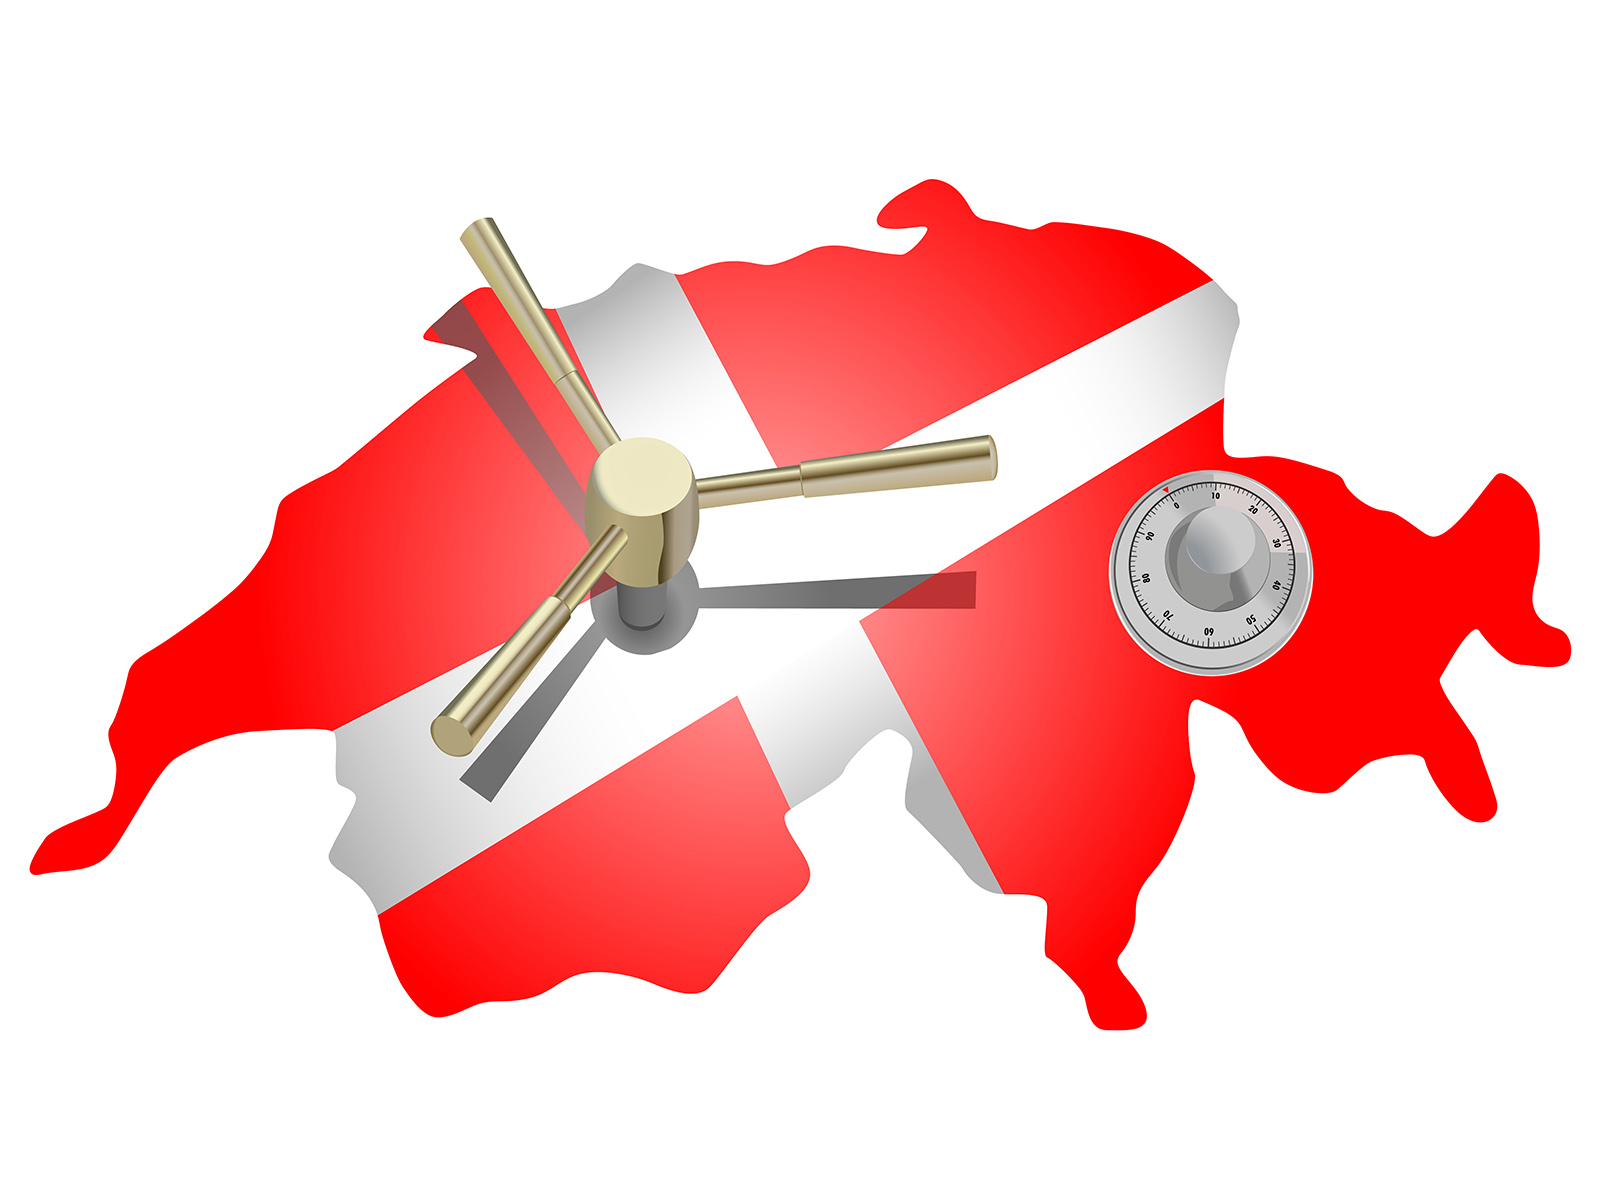 AML Compliance story. Art shows a cutout of a Swiss flag with a vault handle and lock imposed on it. Reference to Swiss AML Compliance laws, KYC AML, UBOs, etc.